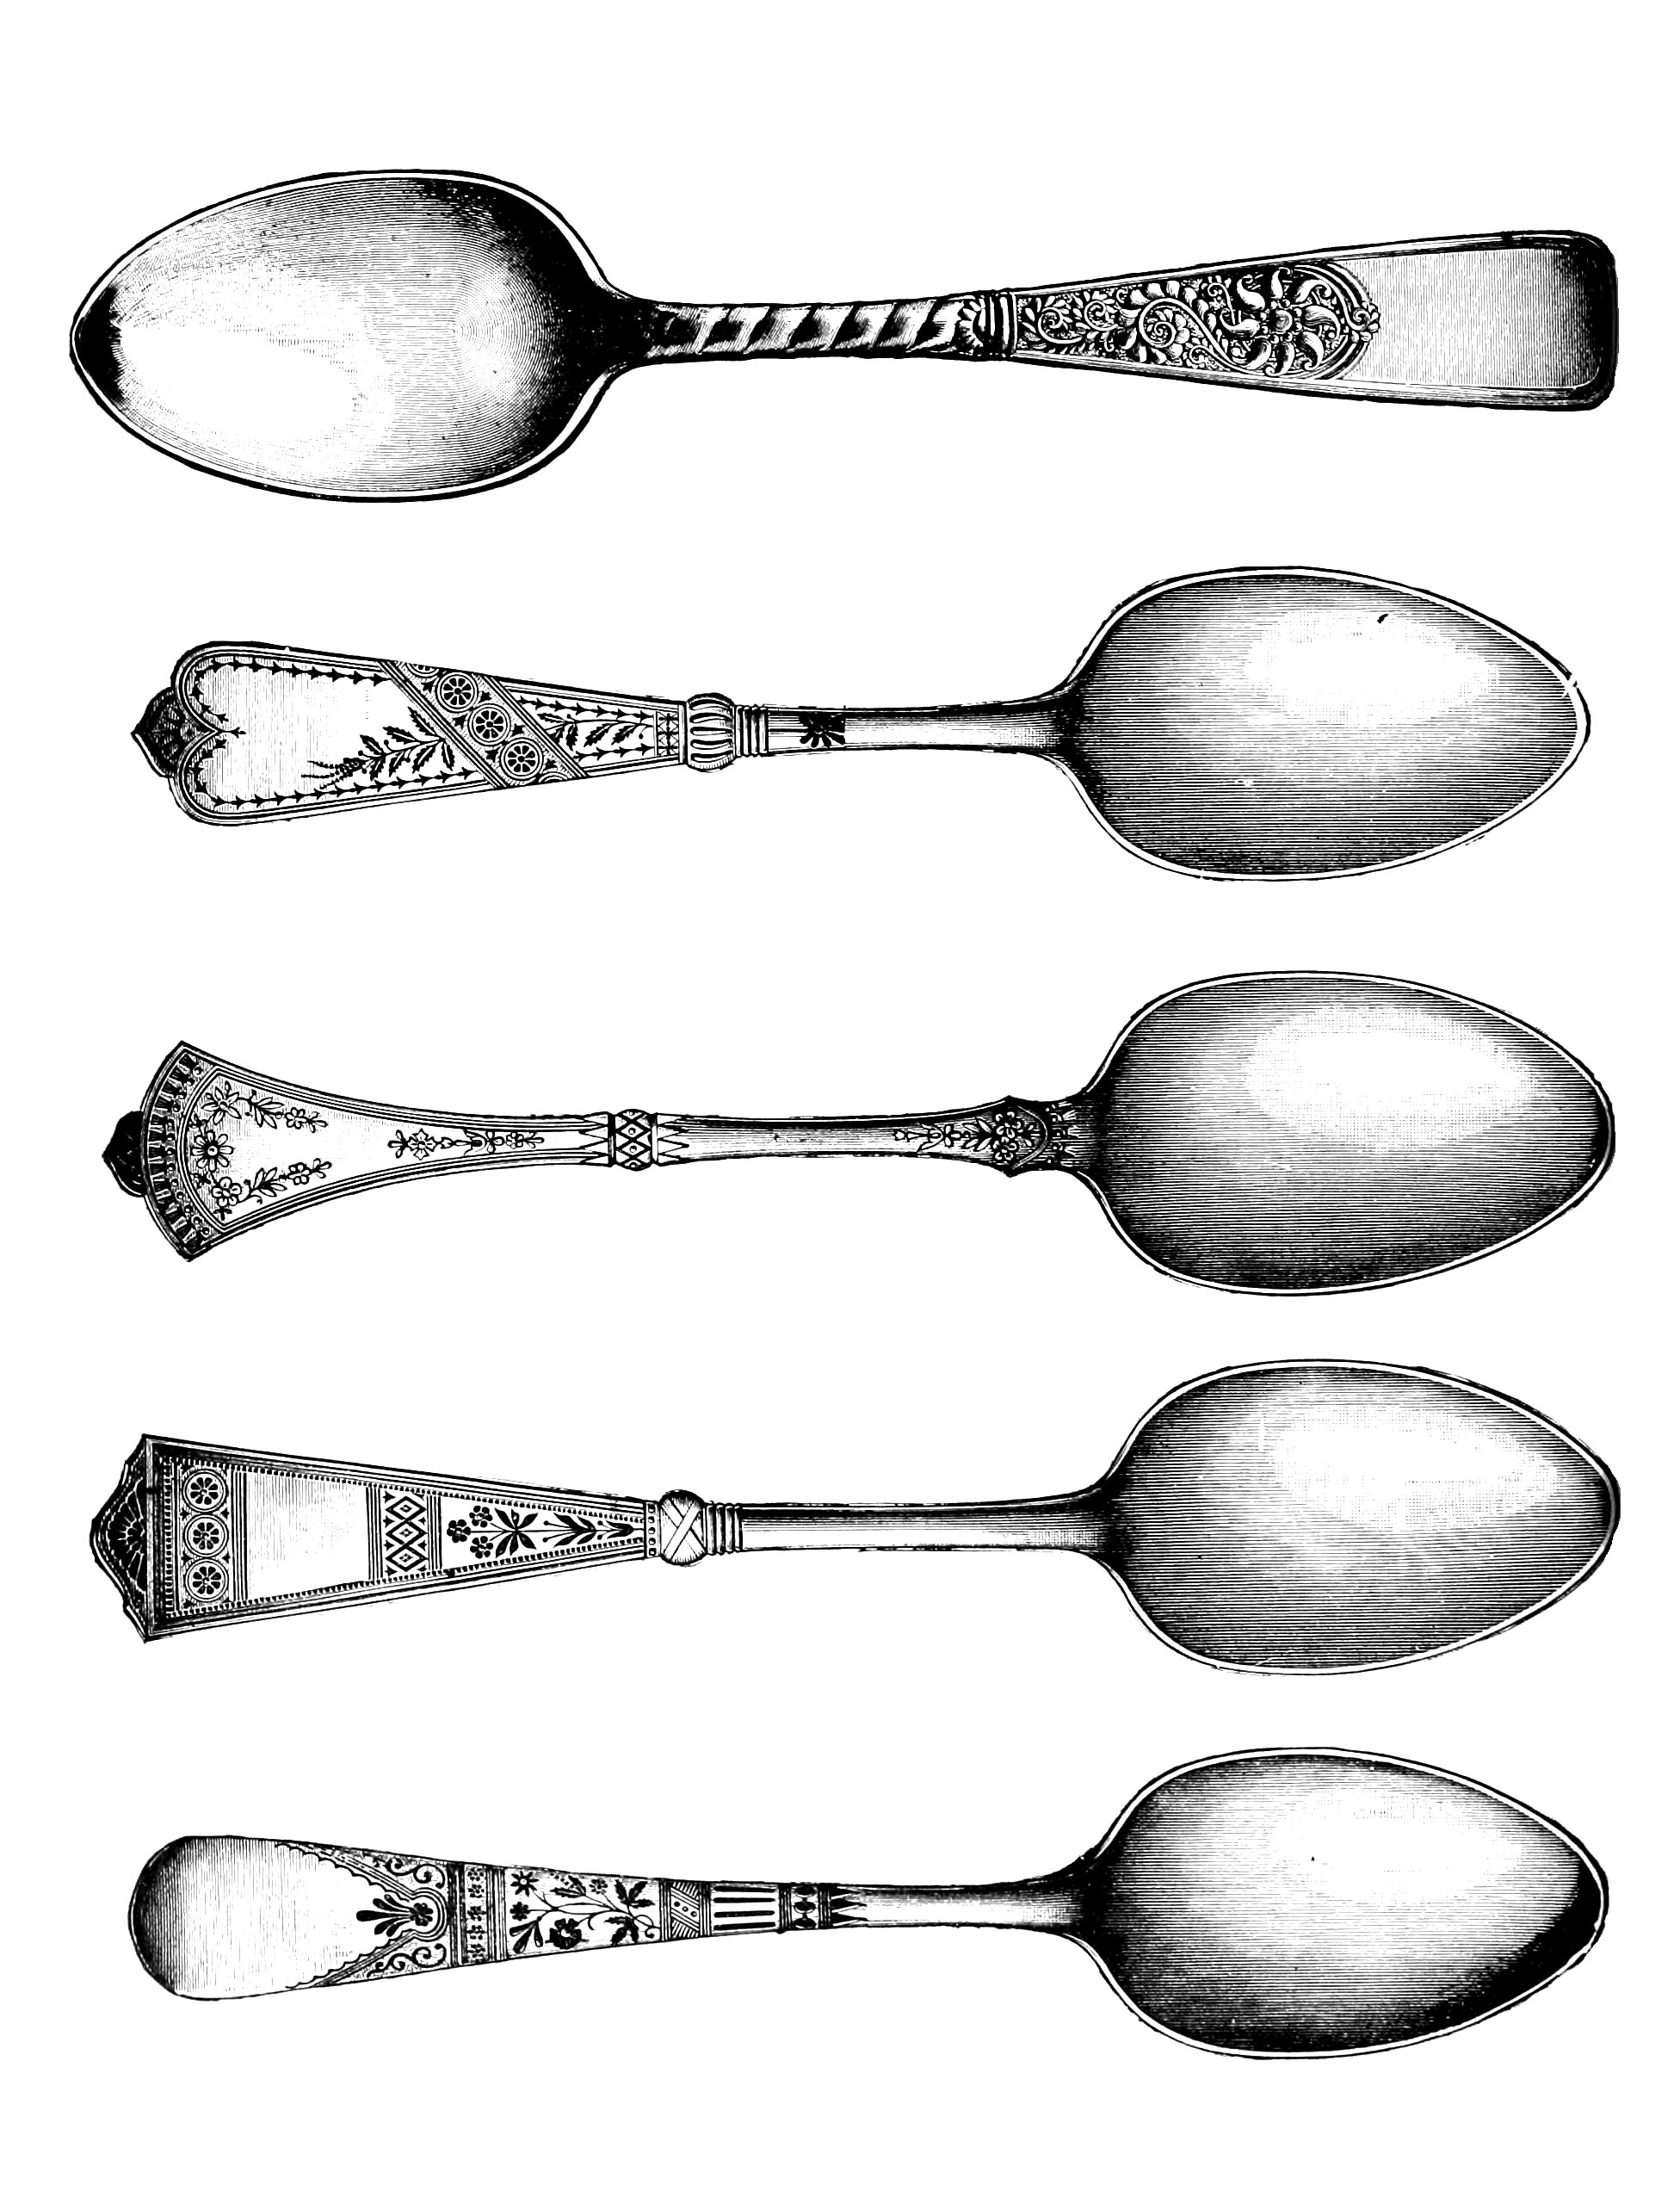 Vintage spoons clipart image oh so nifty vintage graphics clipartcow